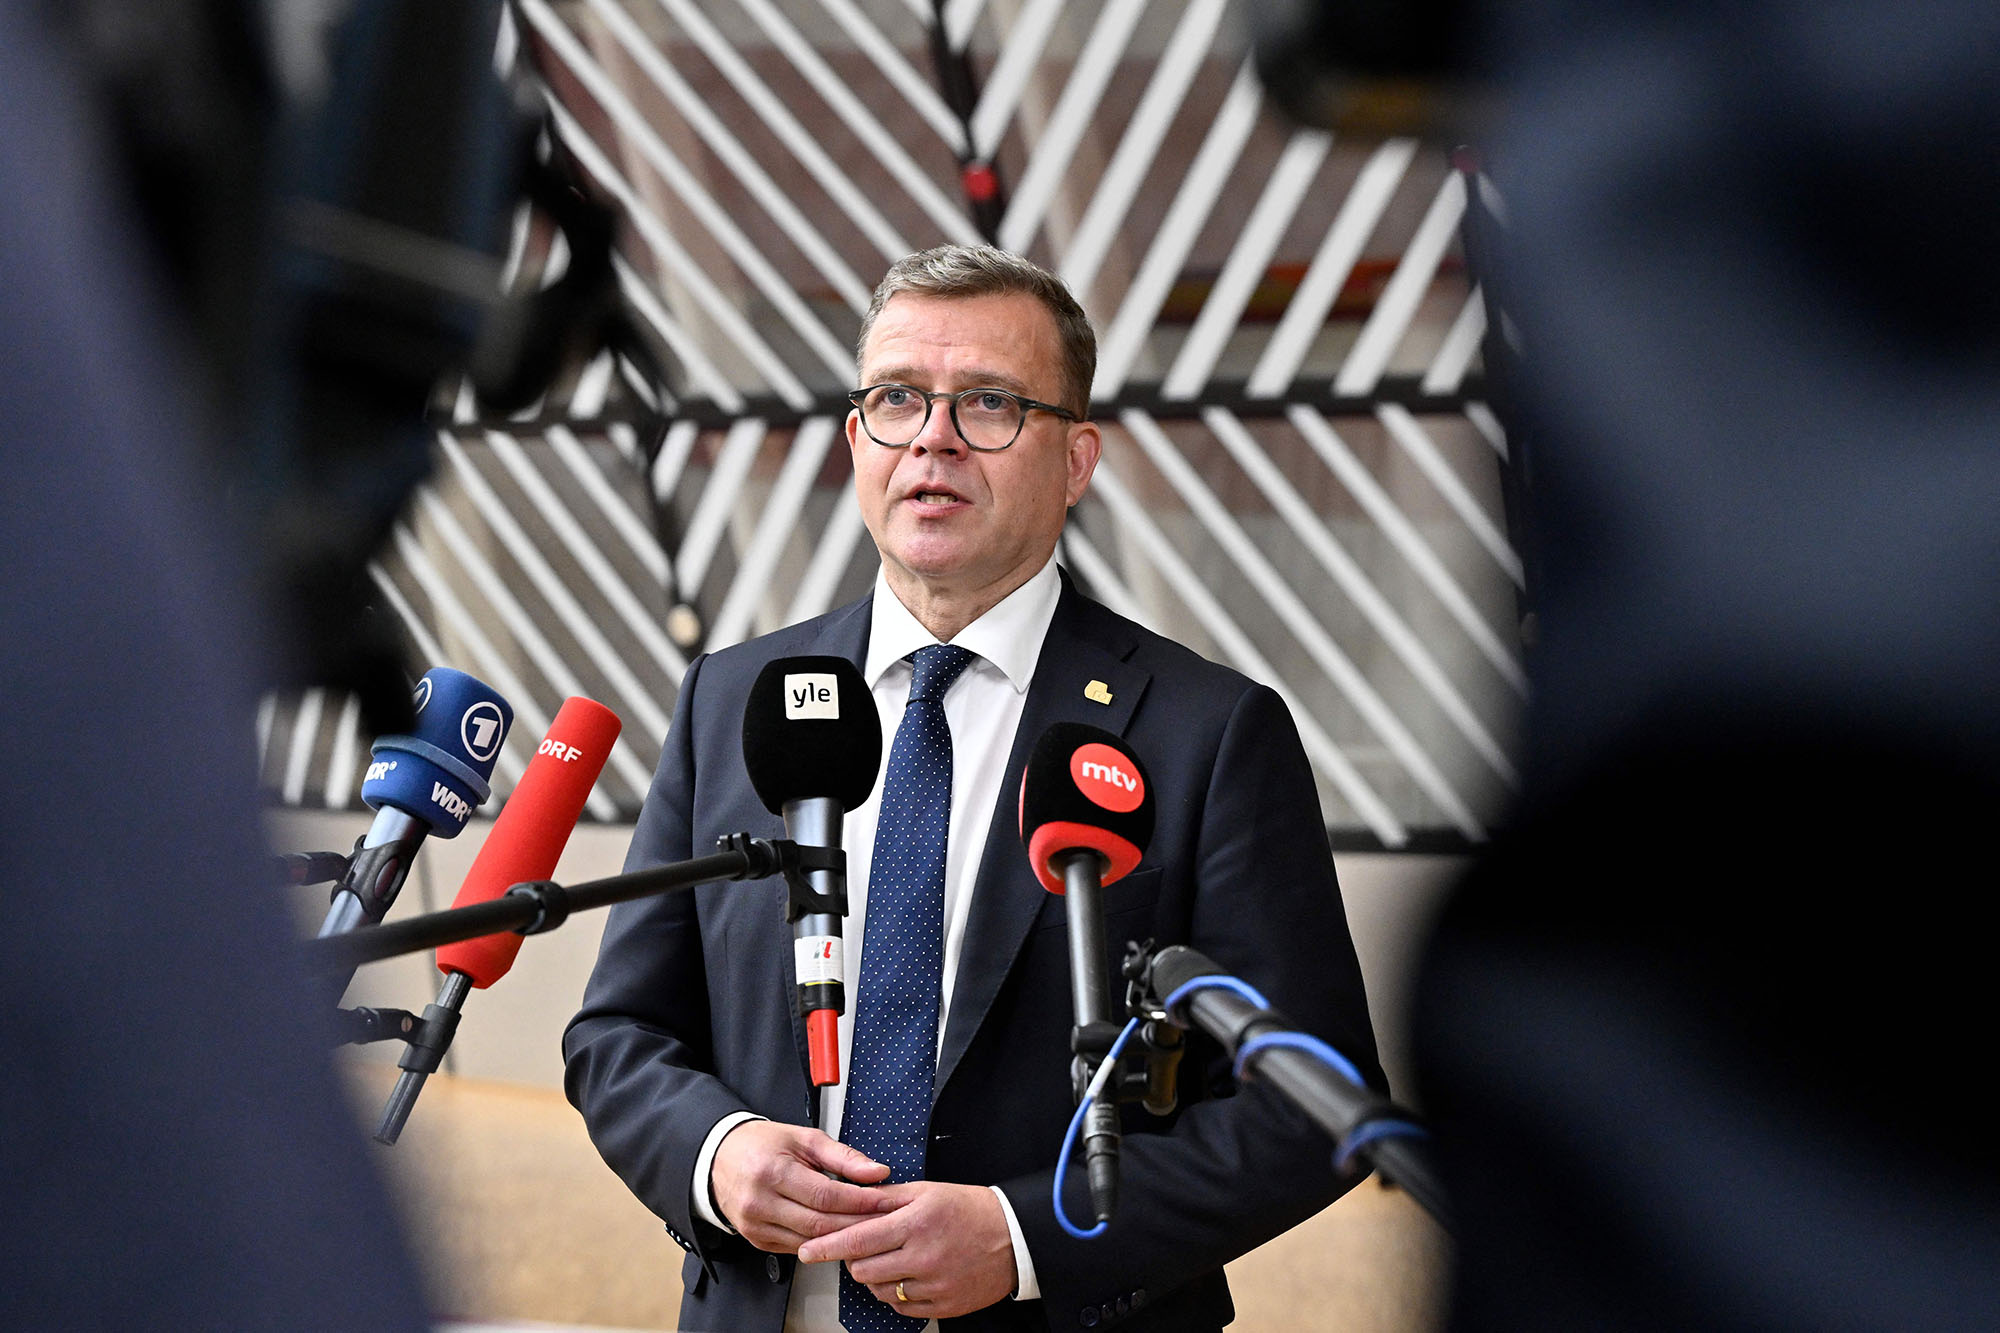 Finland's Prime Minister Petteri Orpo talks to the media as he arrives for a European Council Summit, at the EU headquarters in Brussels, Belgium, on June 29.